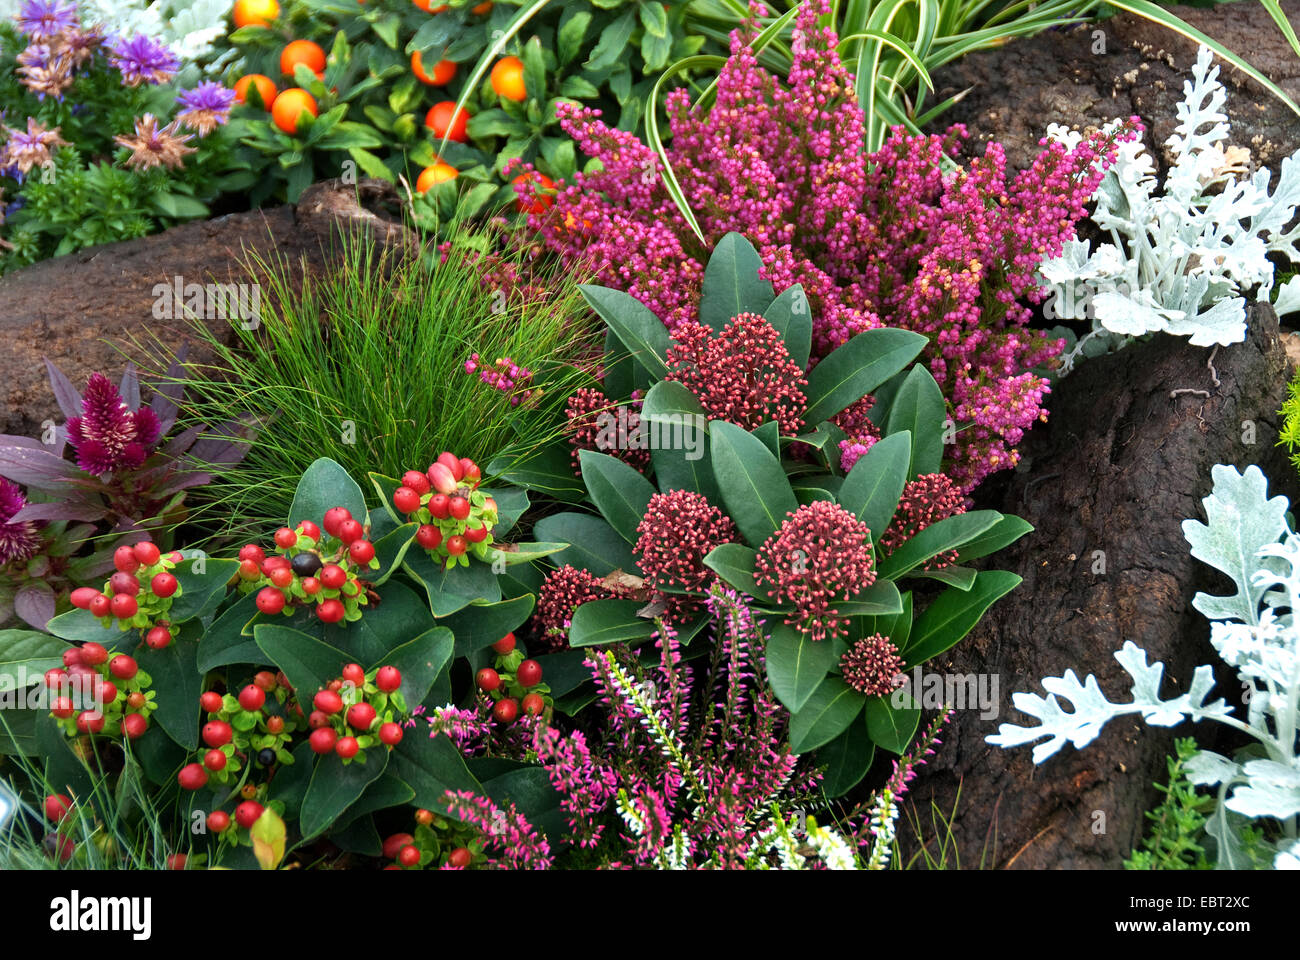 Pictures Of Skimmia Japonica 10